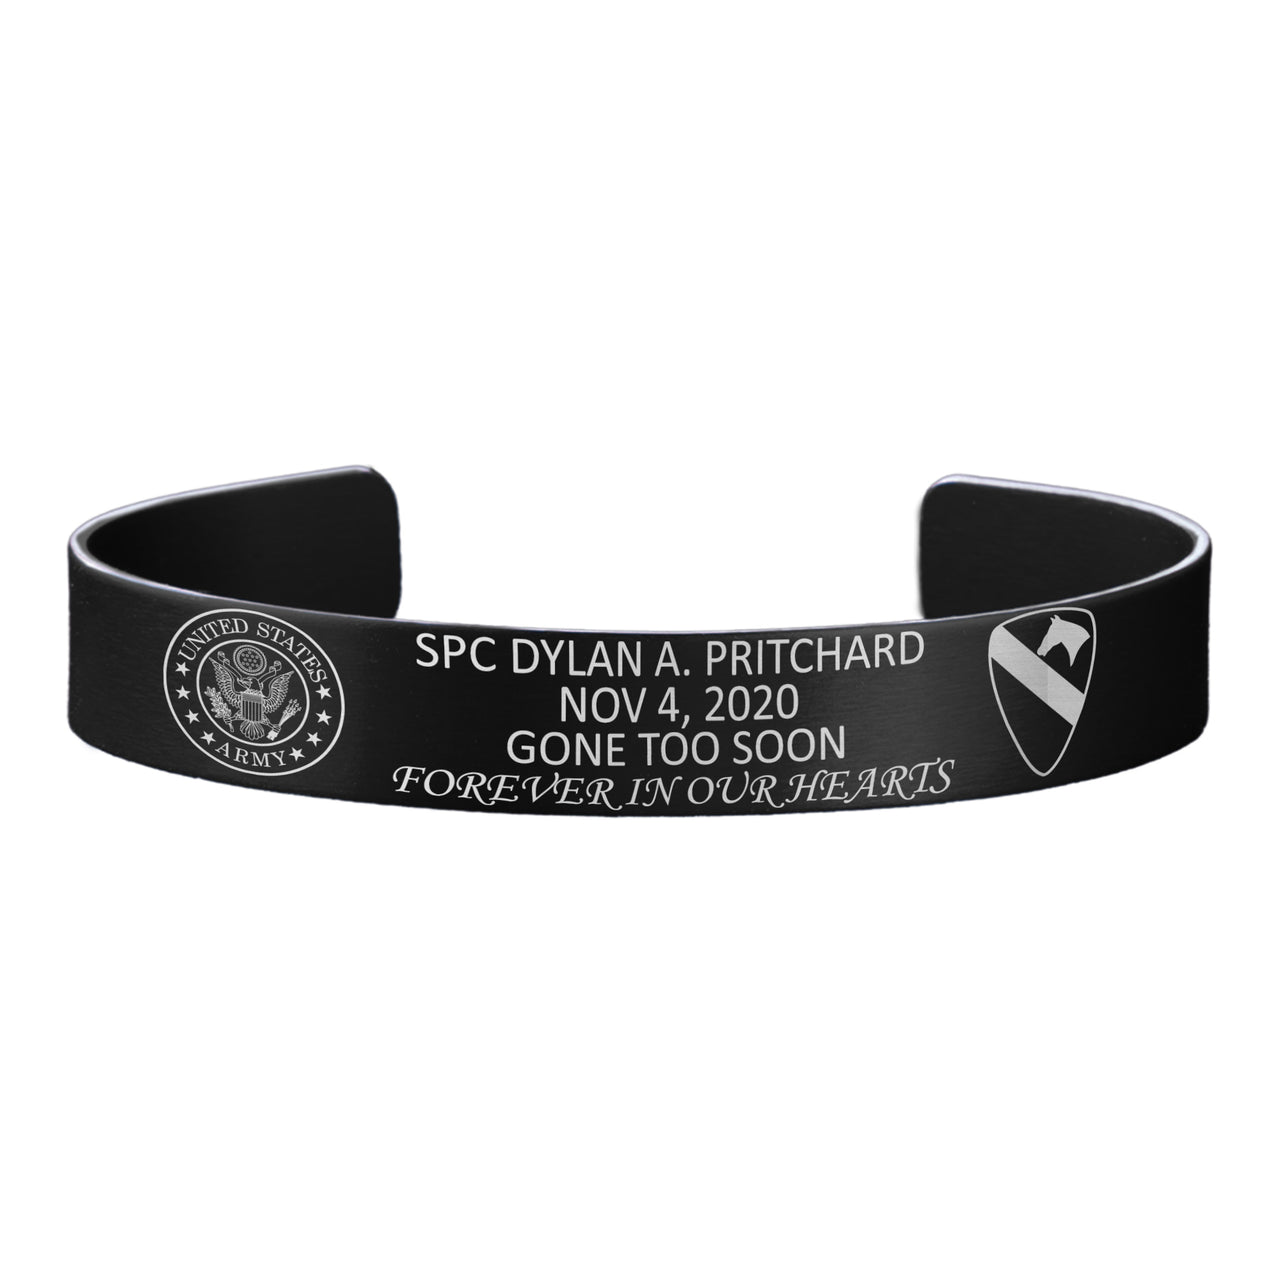 SPC Dylan A. Pritchard Memorial Band – Hosted by the Pritchard Family